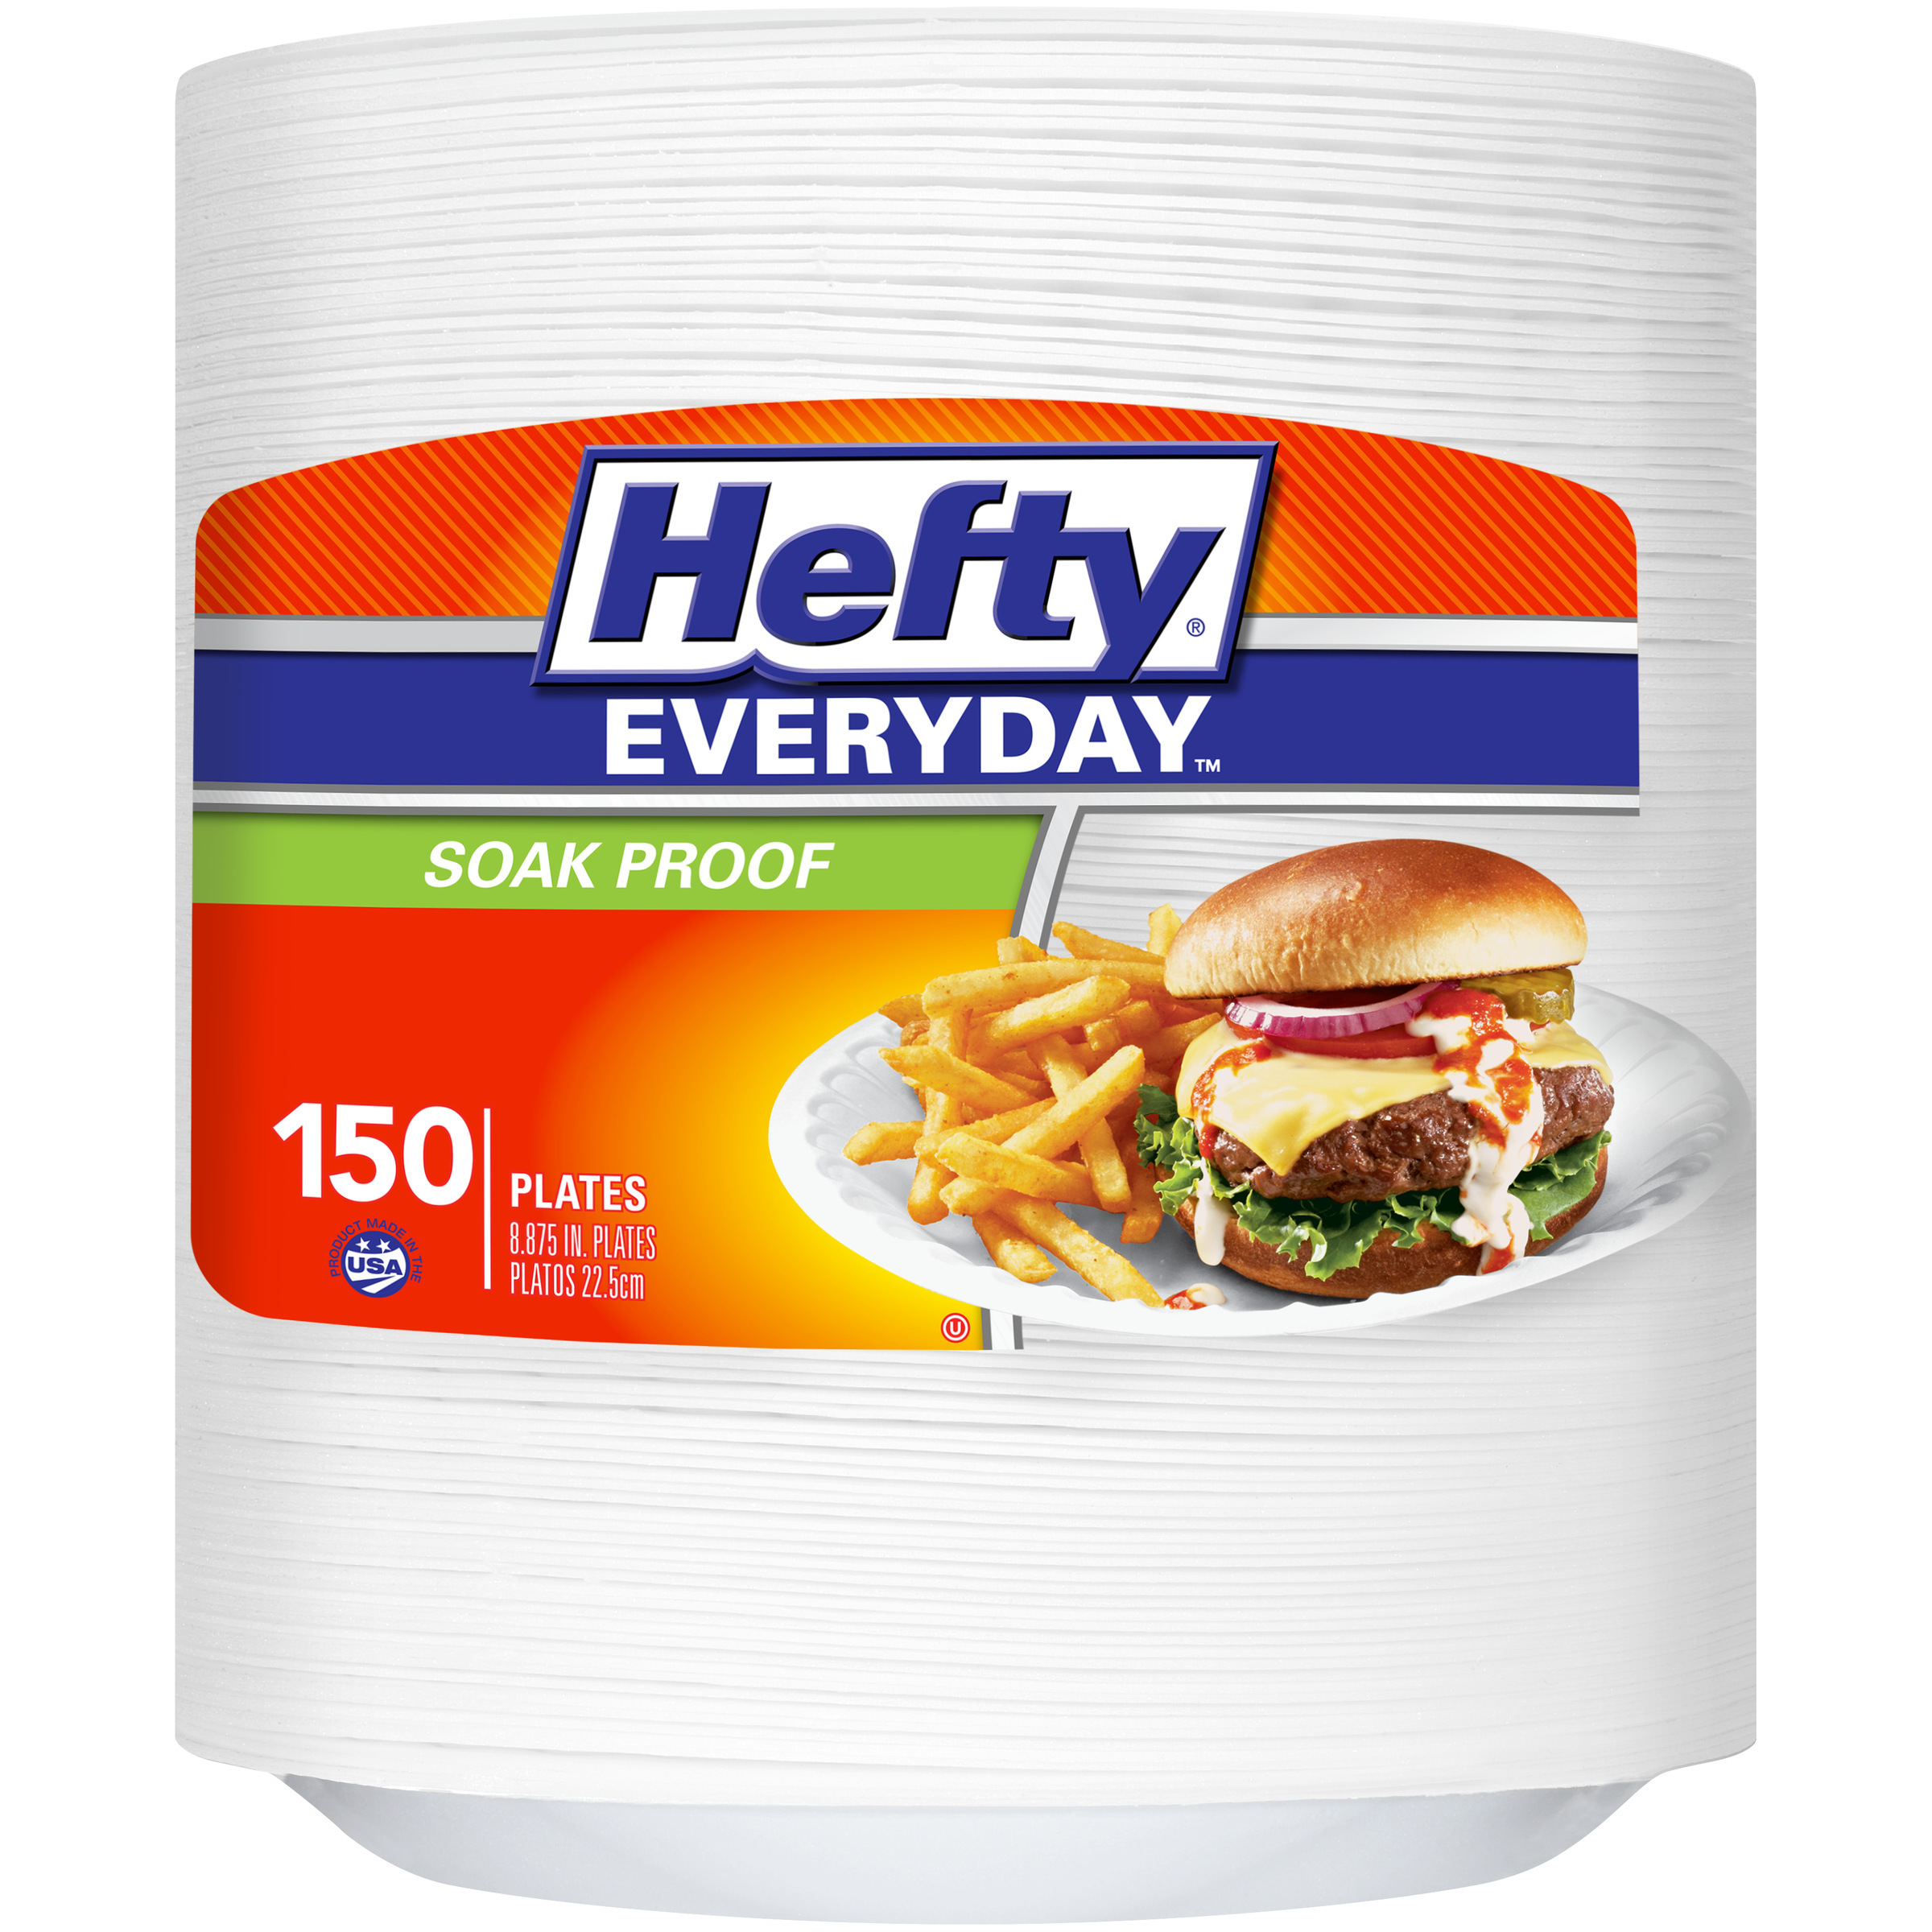 Hefty Everyday Soak-Proof Foam Plates, White, 9 Inch, 150 Count - image 2 of 5